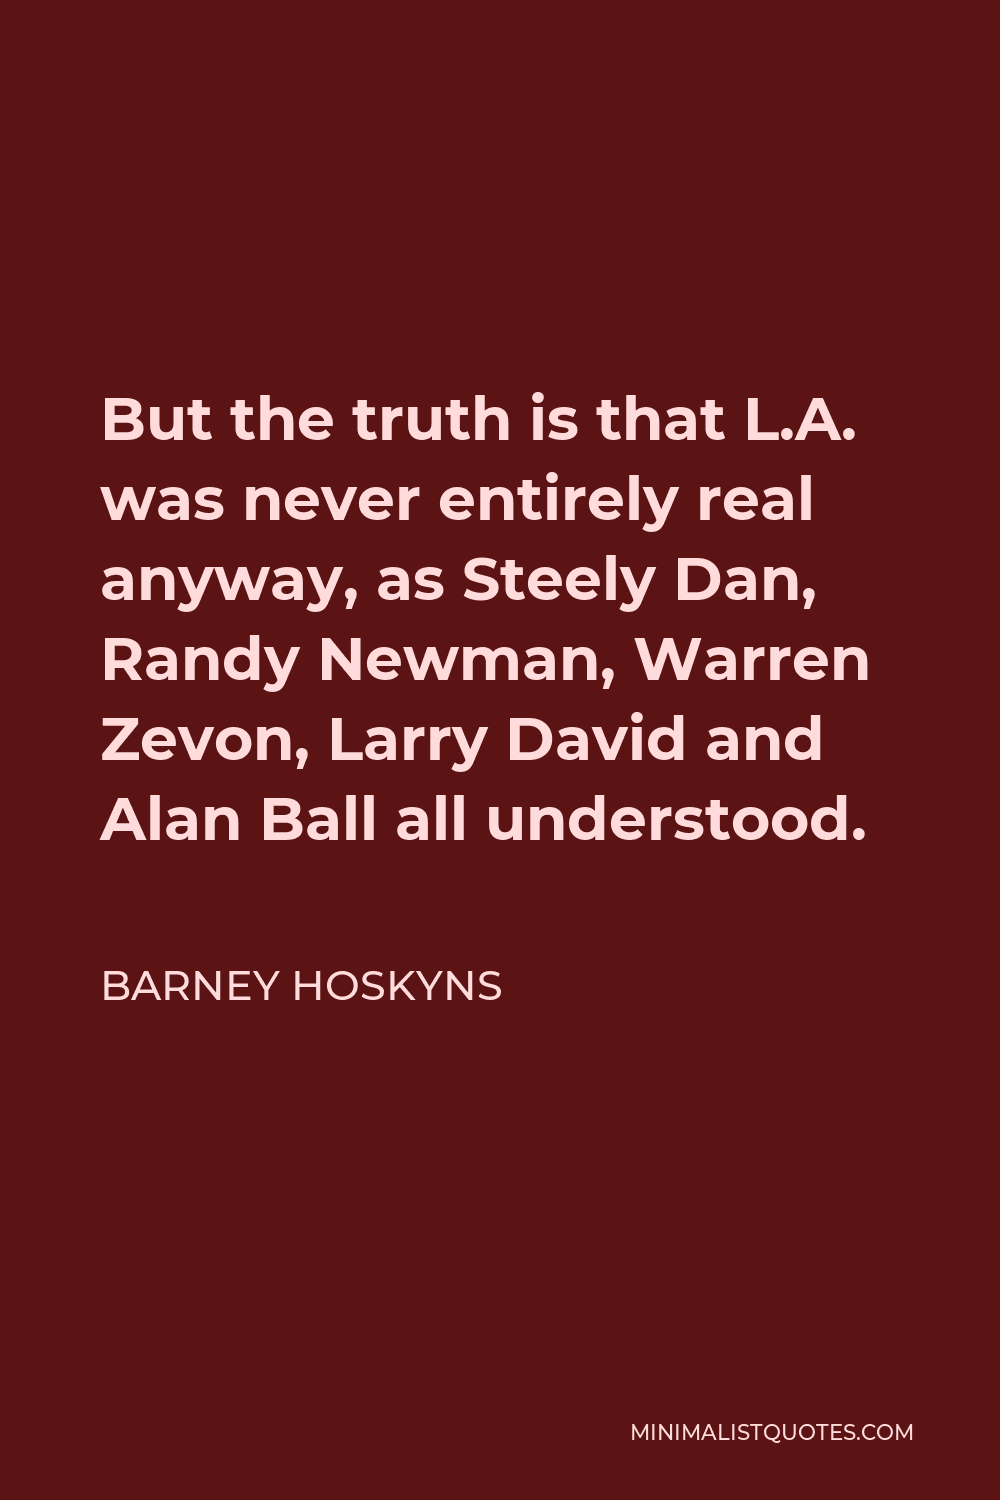 Barney Hoskyns Quote - But the truth is that L.A. was never entirely real anyway, as Steely Dan, Randy Newman, Warren Zevon, Larry David and Alan Ball all understood.